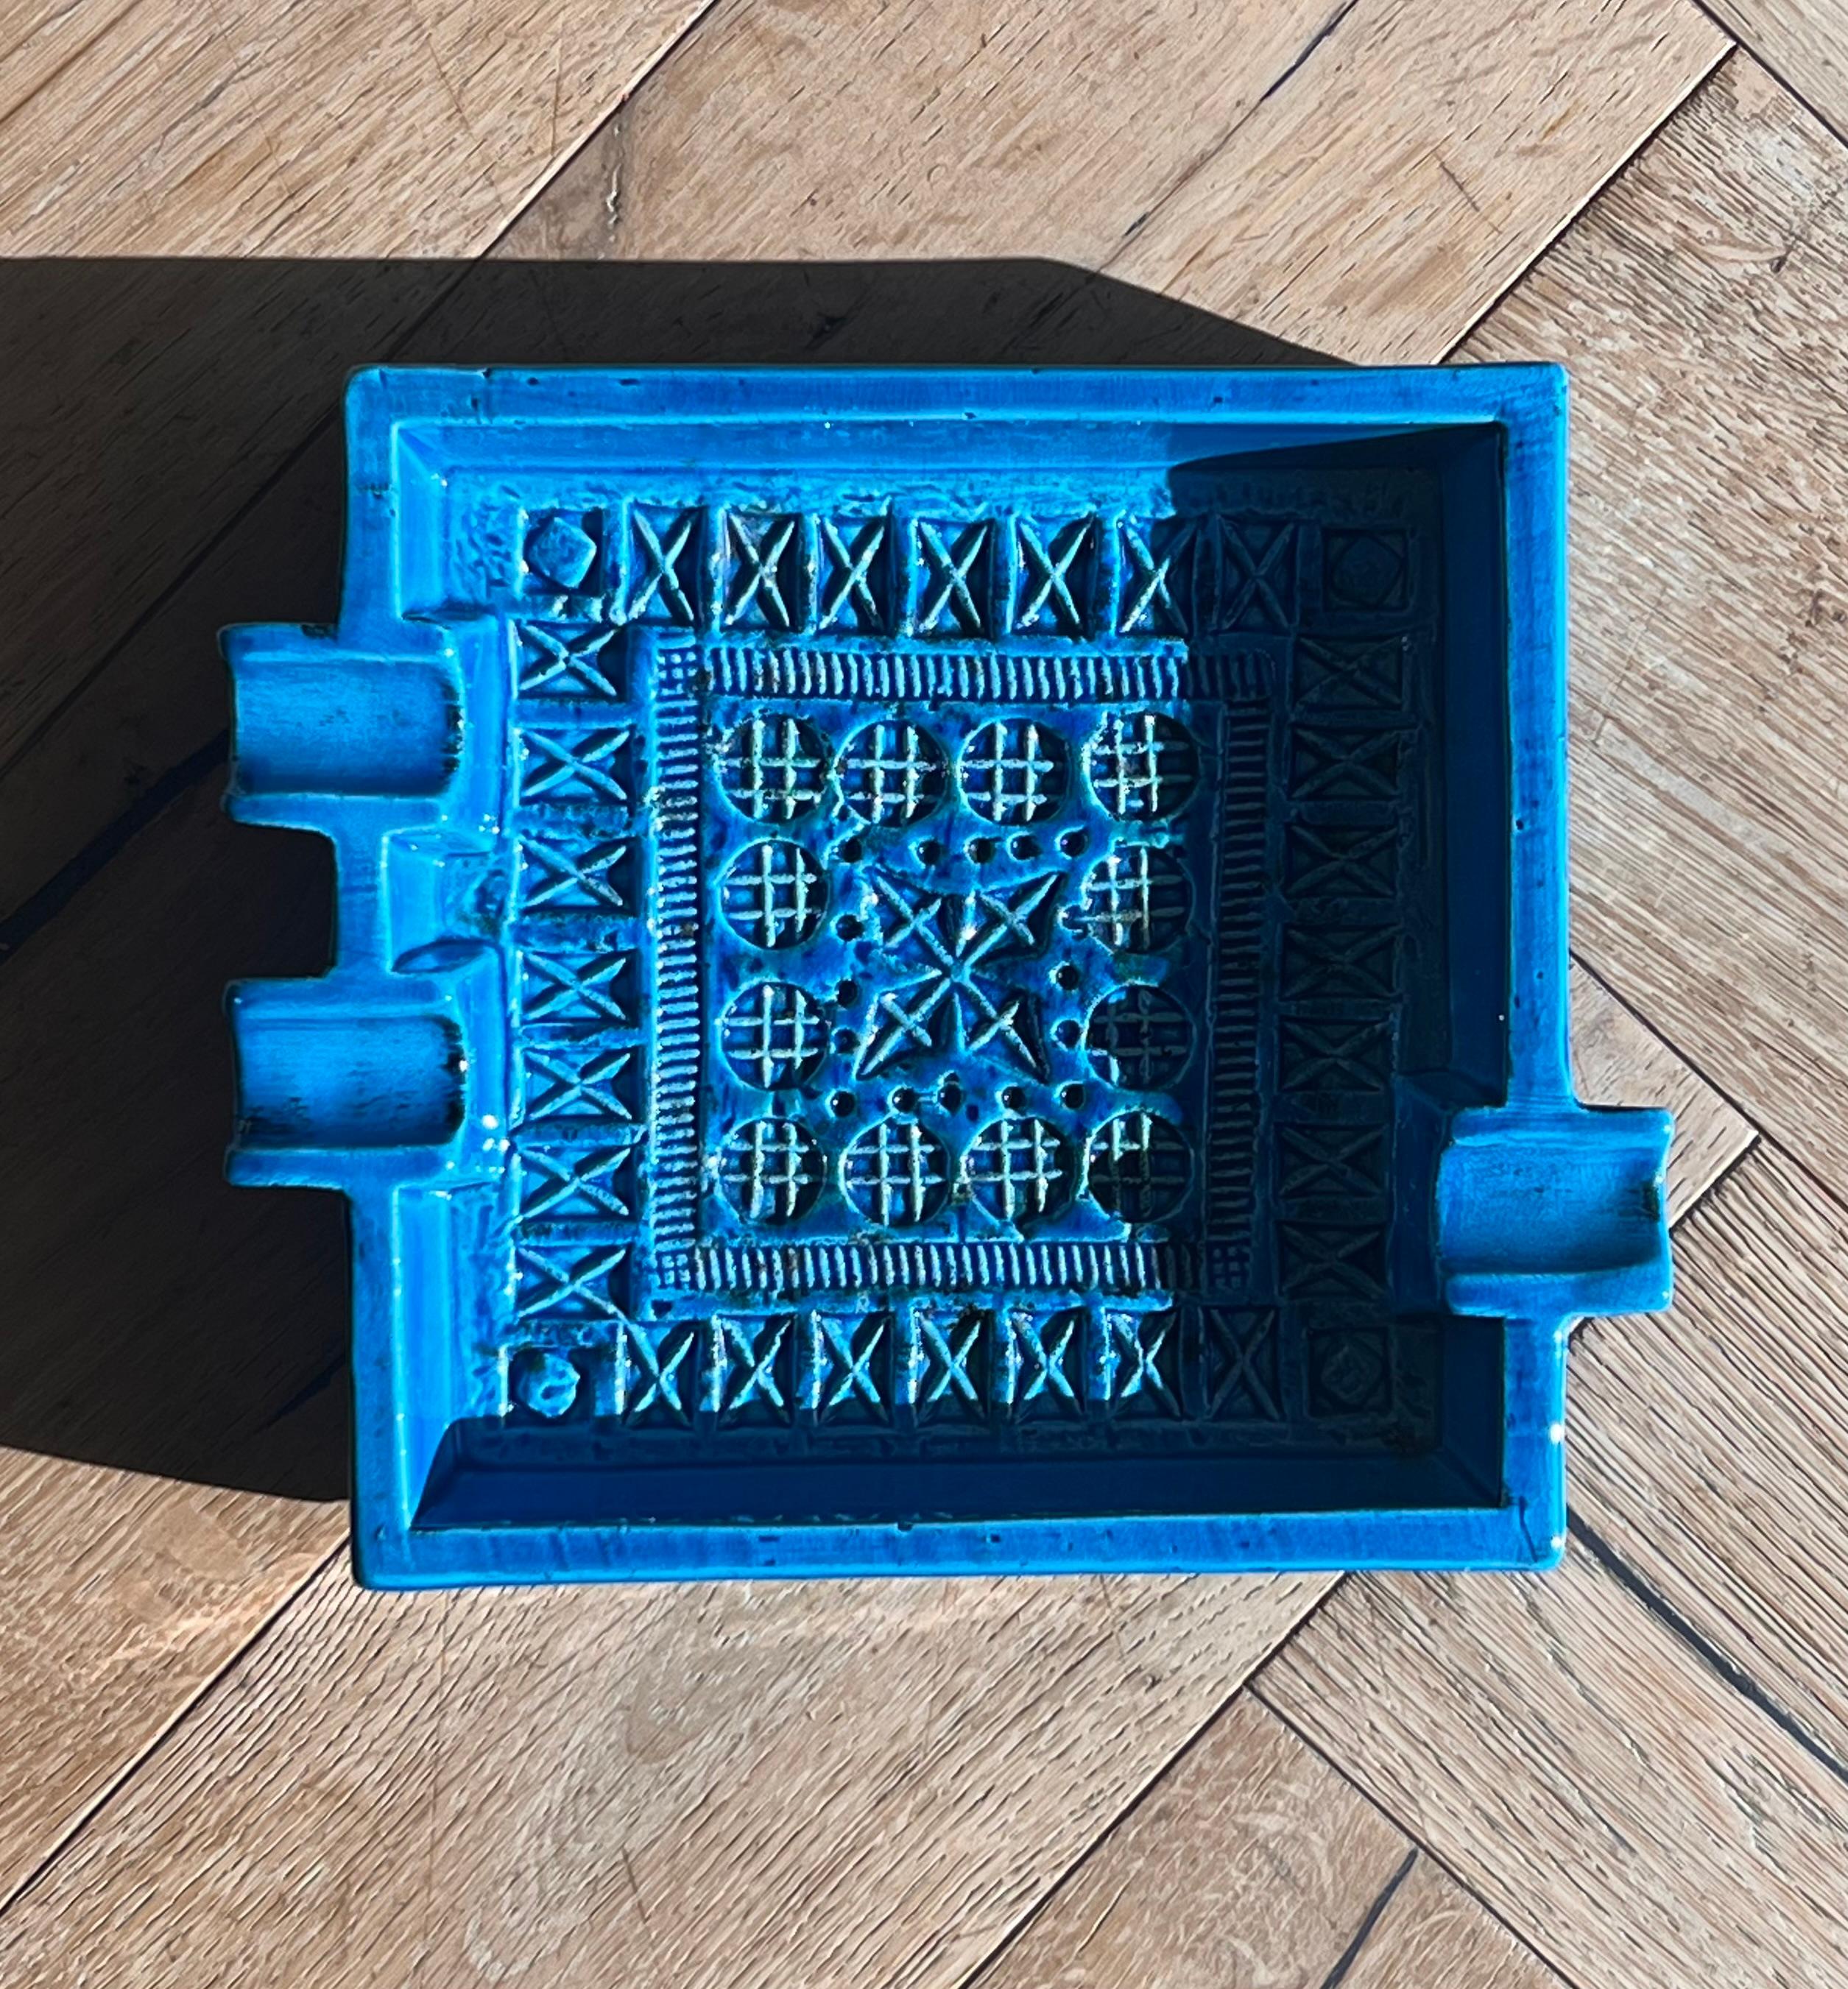 A vintage Italian mid century “Rimini Blu” ceramic ashtray by Aldo Londi for Bitossi, Italy 1960s. In vibrant cerulean blue and featuring an intricate hand-carved geometric motif on the base of the ashtray. One edge boasts two thick rivulets for a